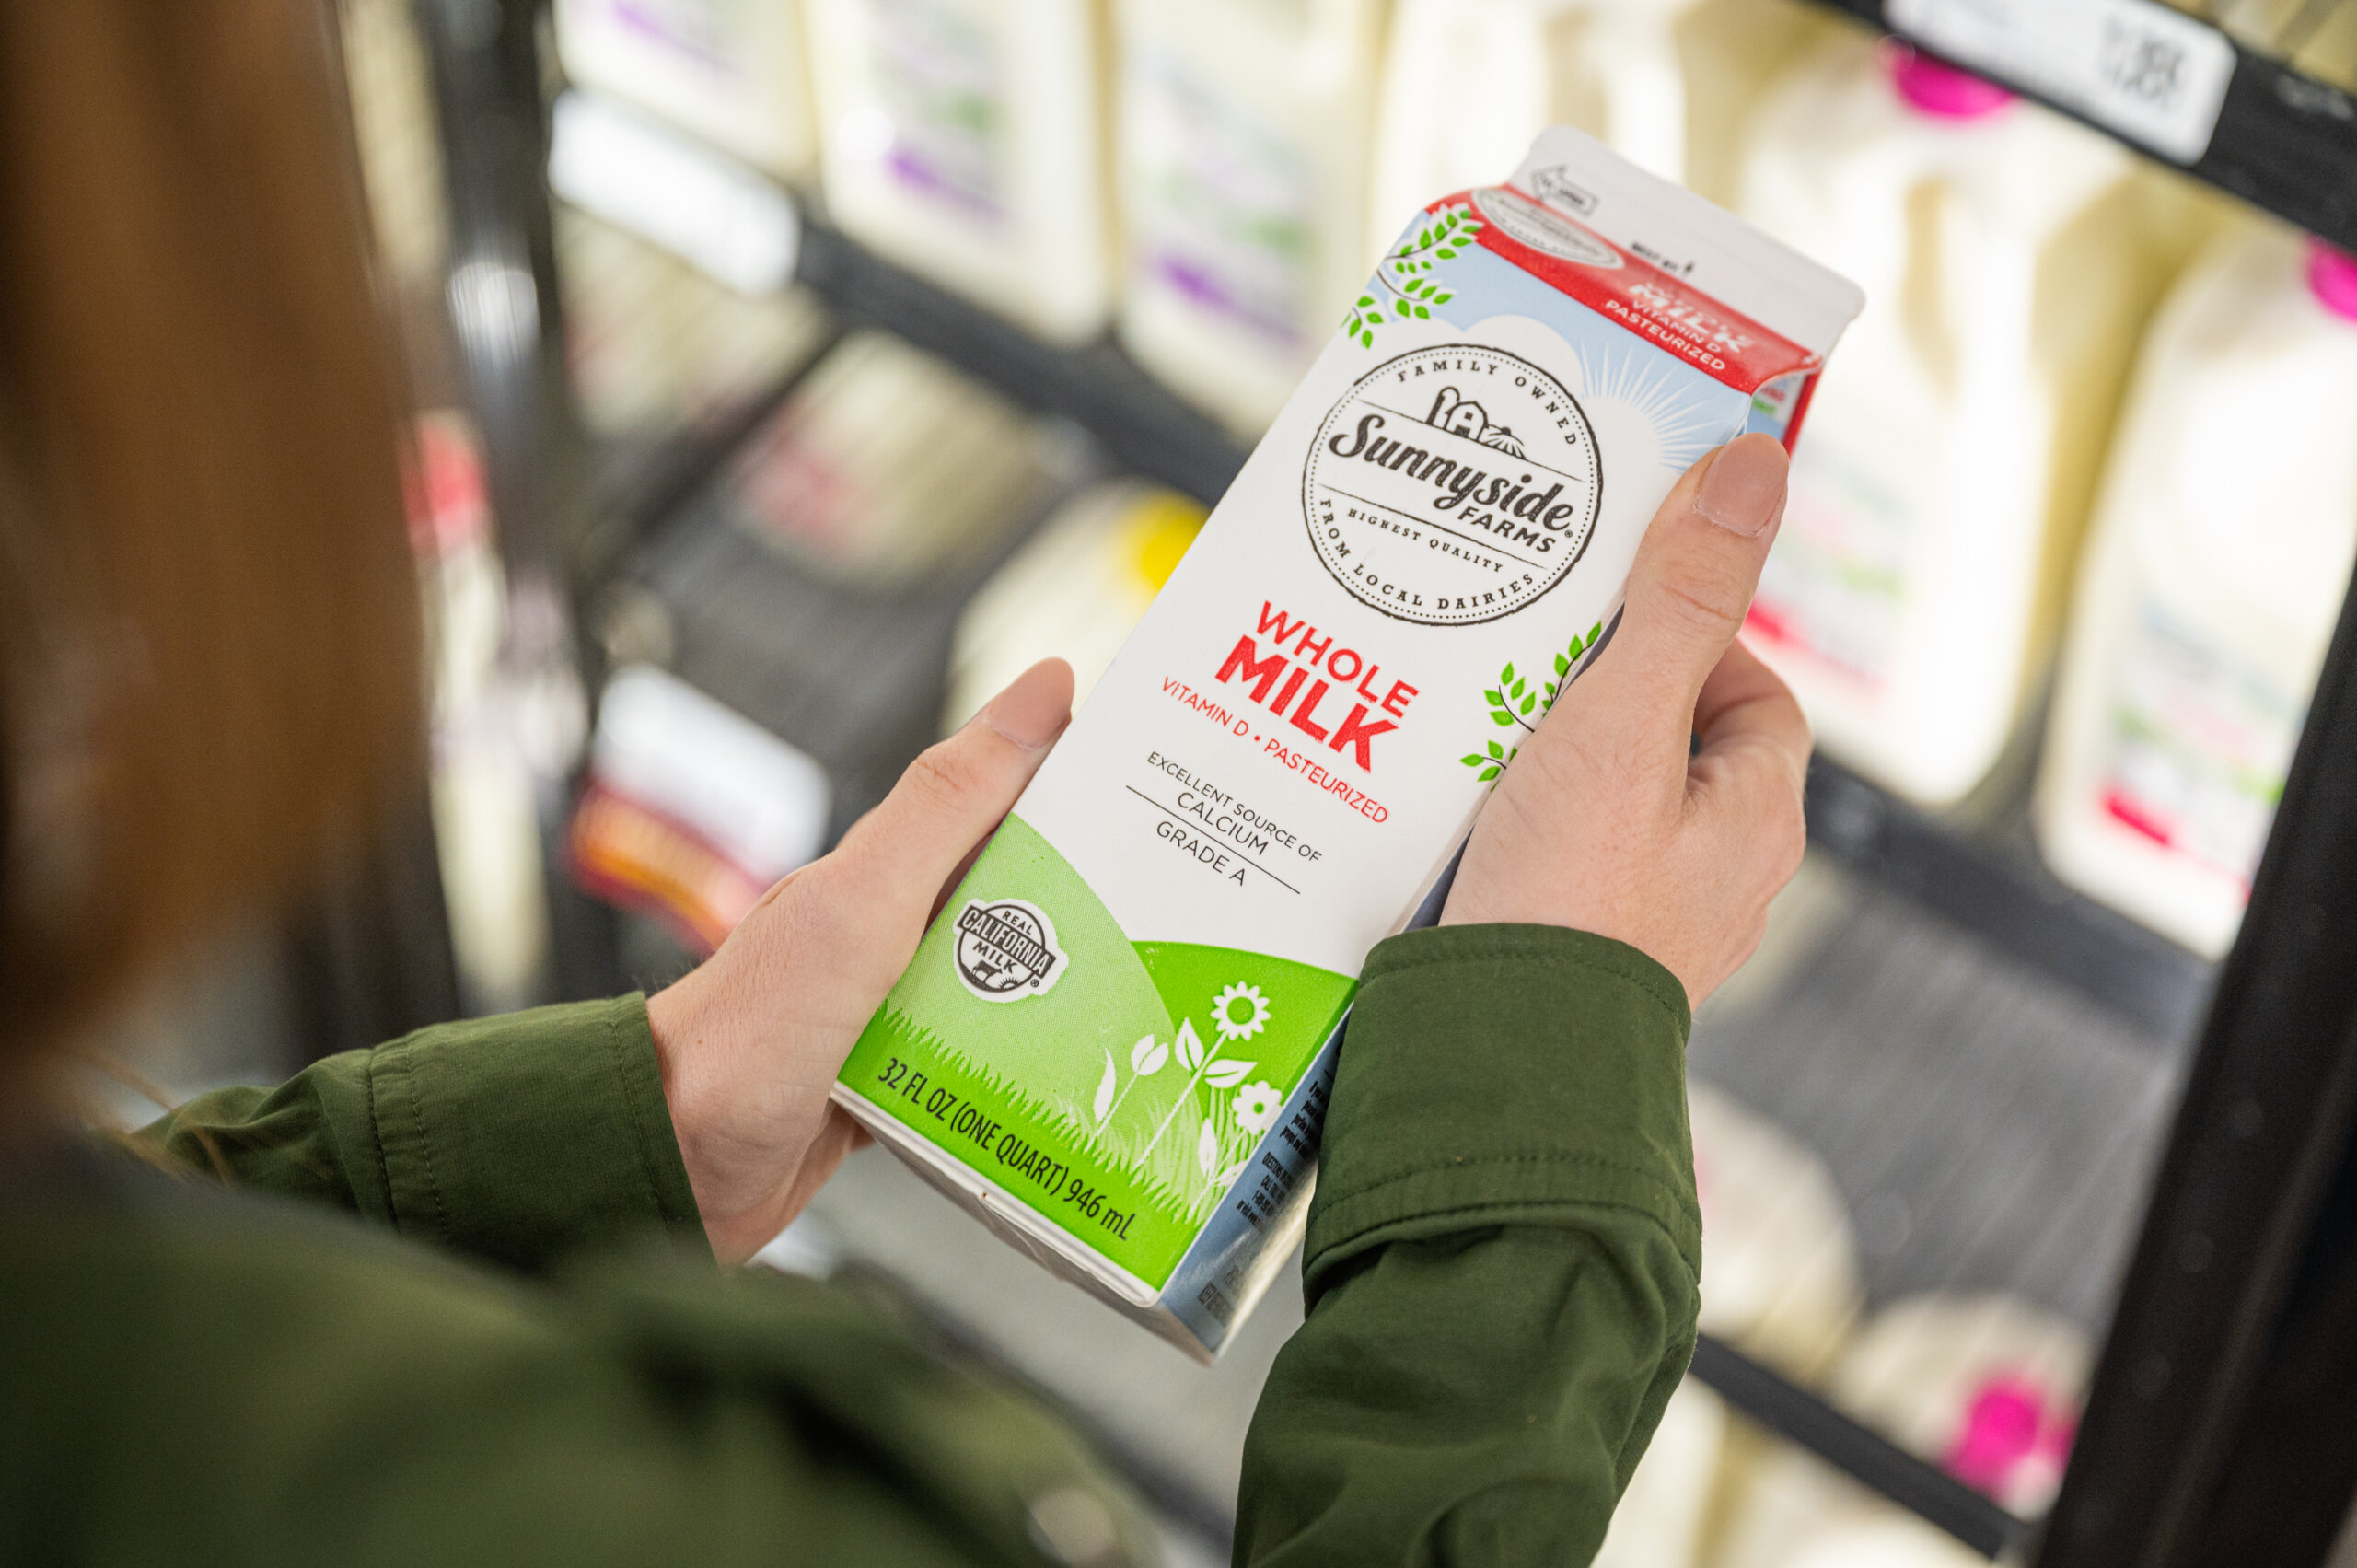 A customer inspects the Real California Milk label on a carton of milk